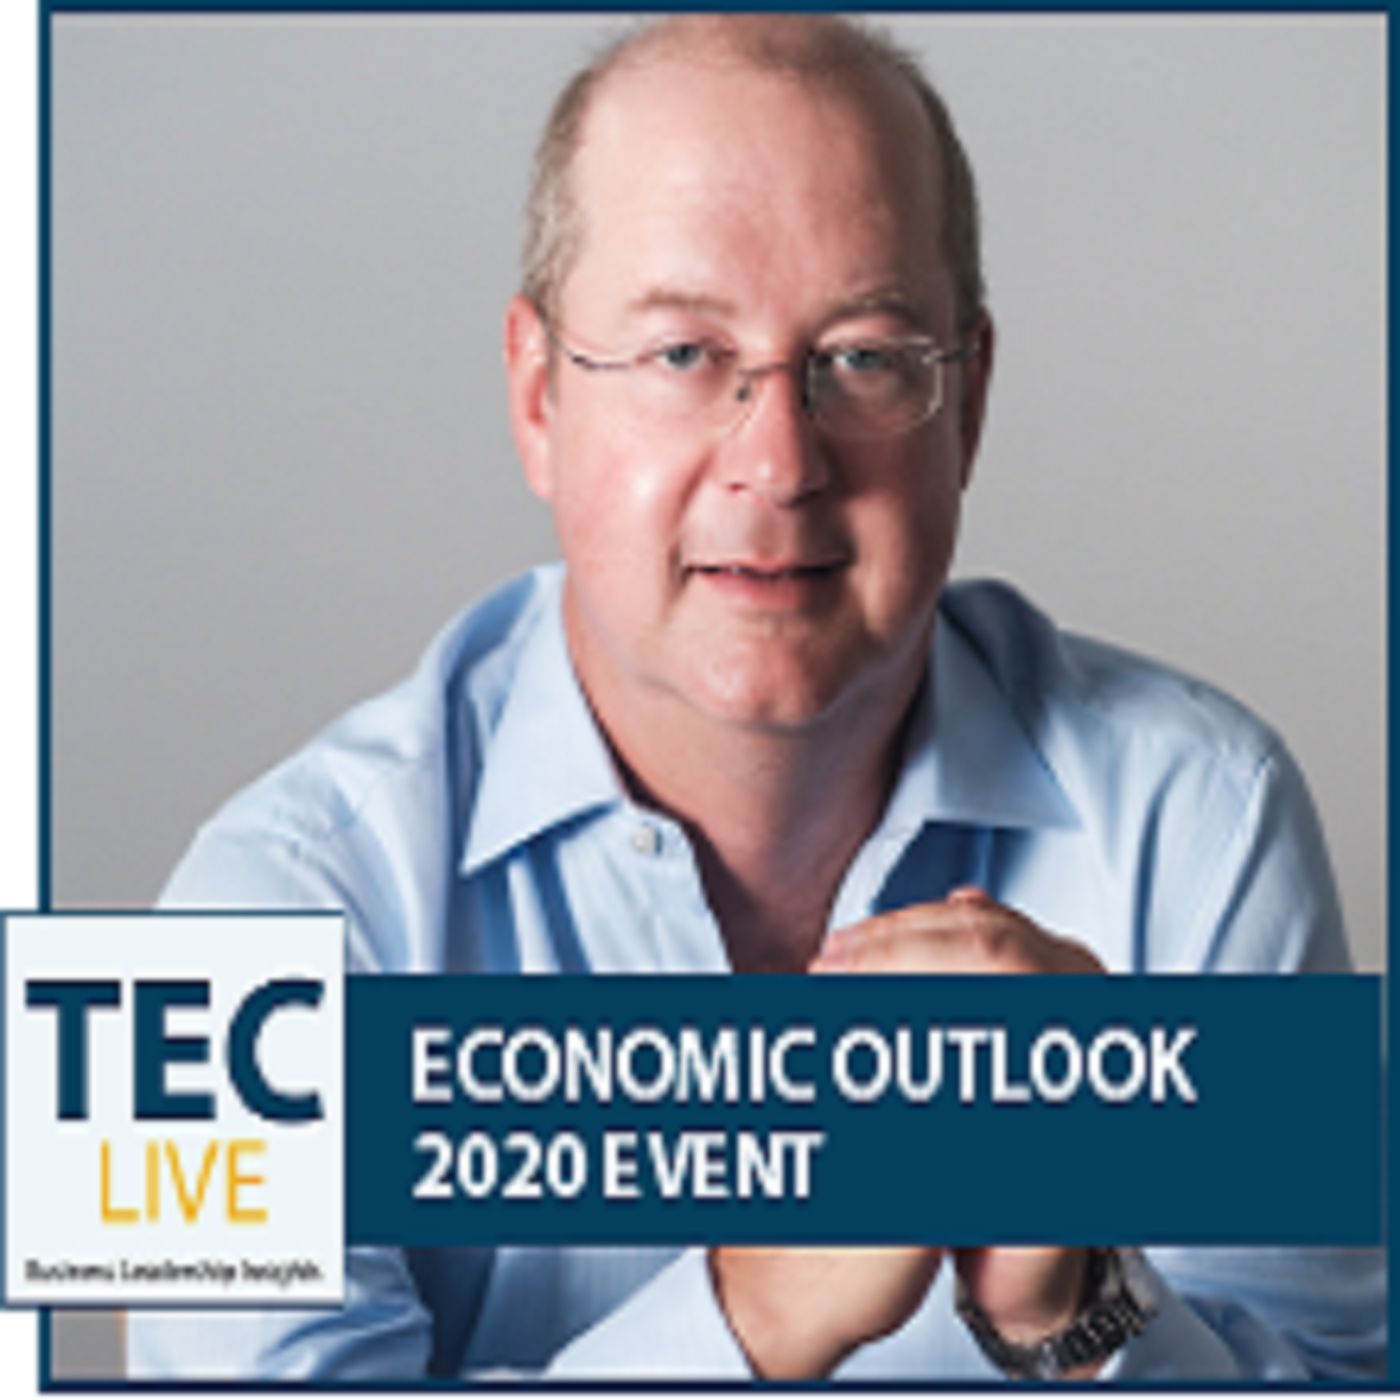 Economic Outlook 2020 for SMEs